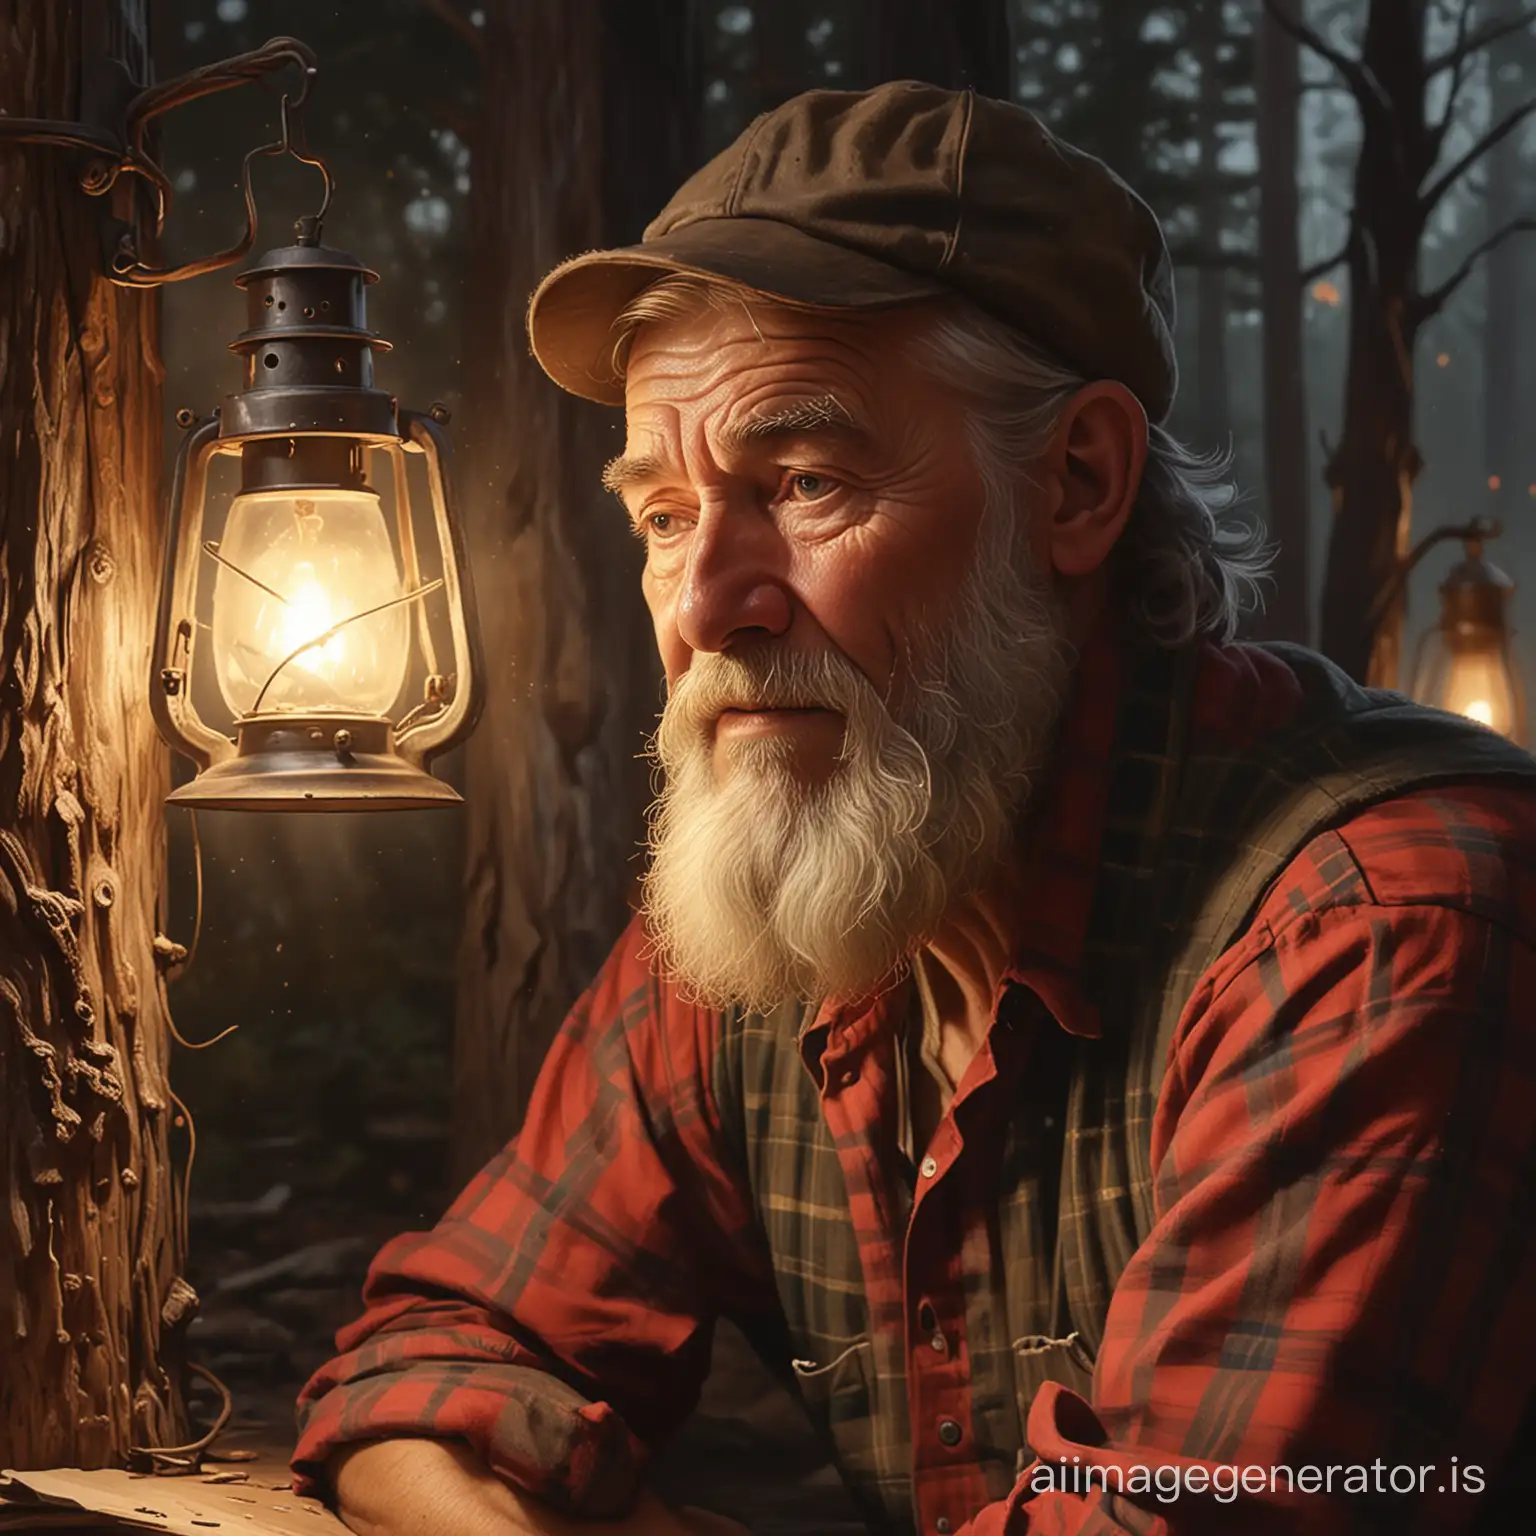 a high quality, emotional painting of an [[old lumberjack]] resting near a [[lamp]] in the late [[afternoon]], showcasing his [[tired]] expression, traditional artwork, warm tones, storytelling, nostalgic vibes, soft lighting, detailed facial expression, atmospheric, expressive brush strokes, 4k.